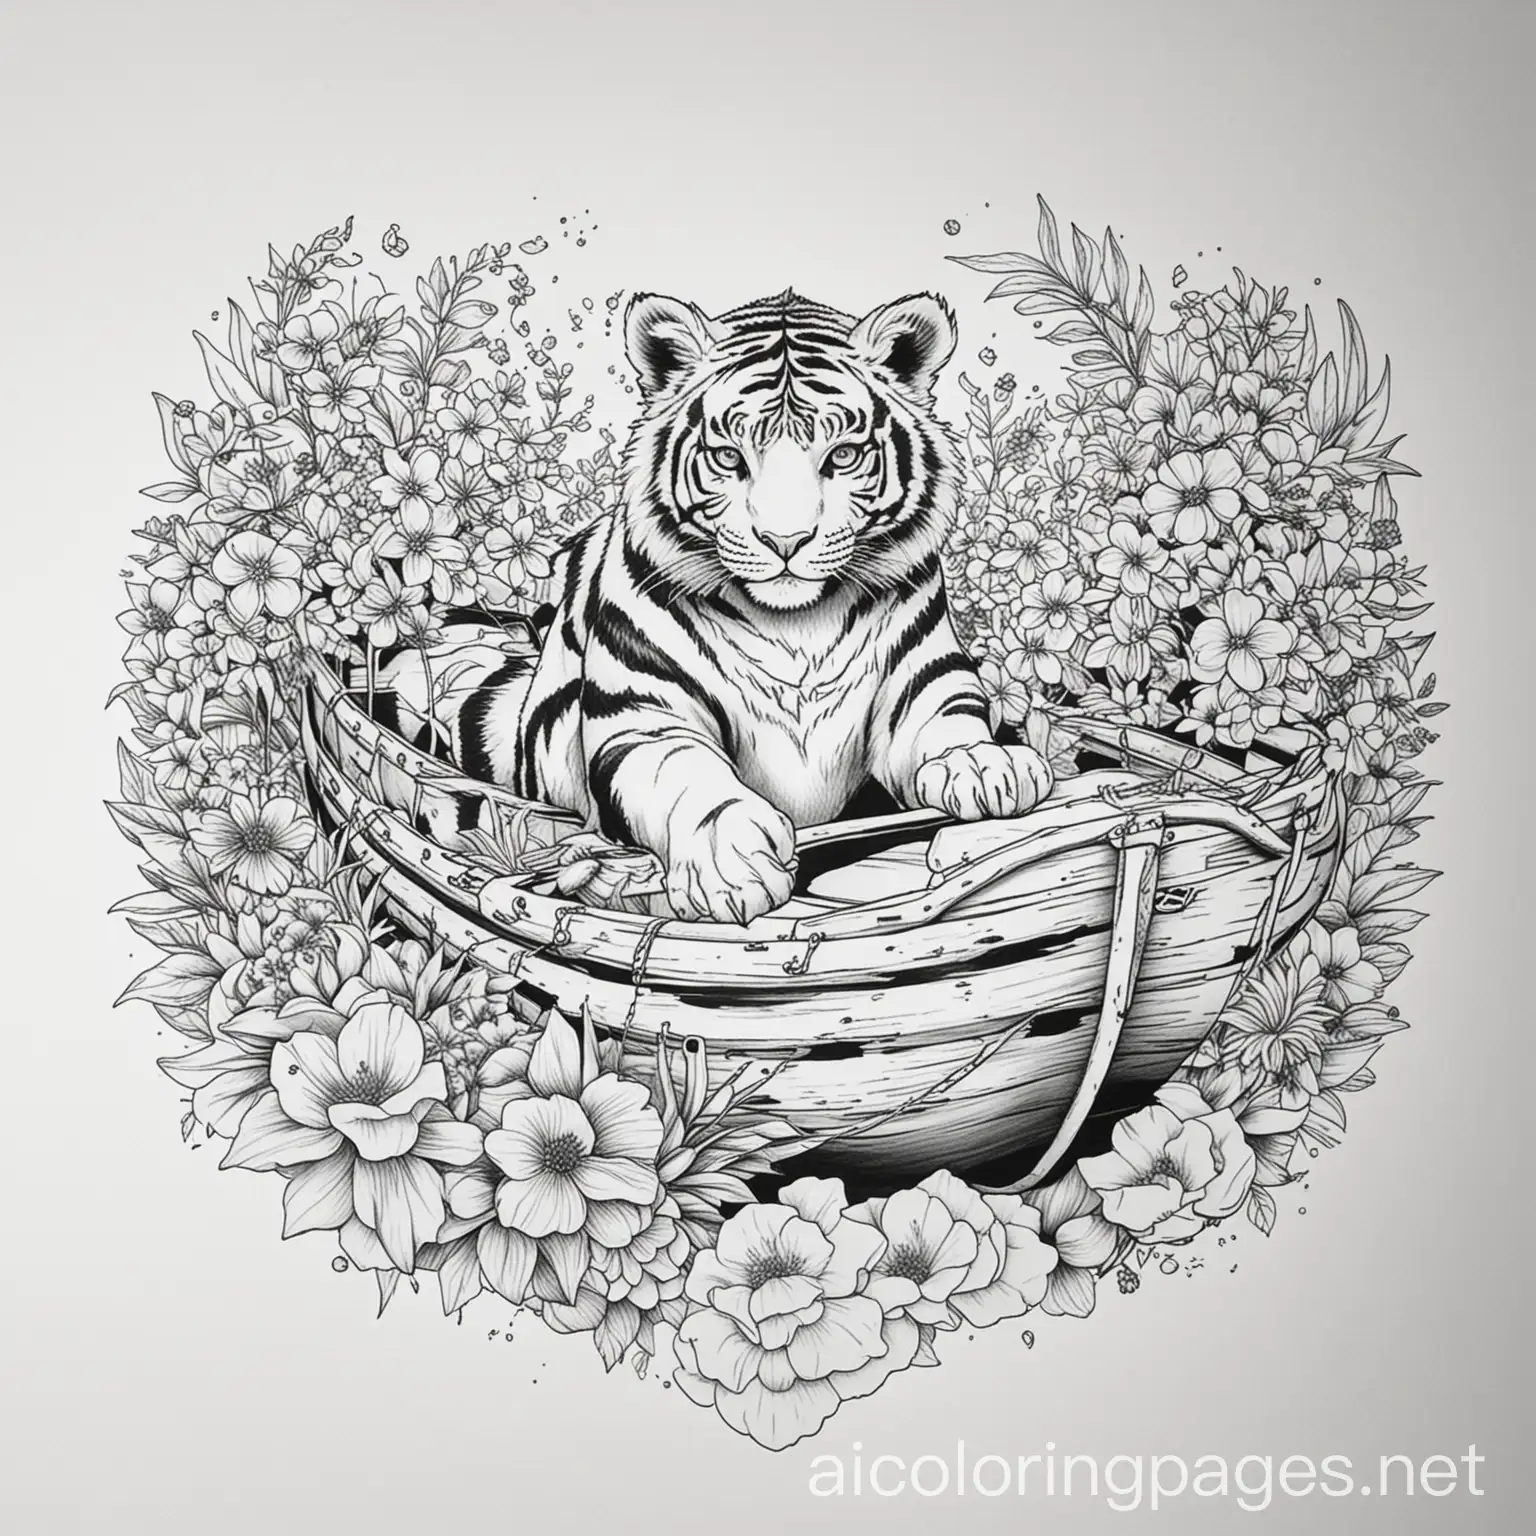 flowers tiger naruto car boat


, Coloring Page, black and white, line art, white background, Simplicity, Ample White Space. The background of the coloring page is plain white to make it easy for young children to color within the lines. The outlines of all the subjects are easy to distinguish, making it simple for kids to color without too much difficulty